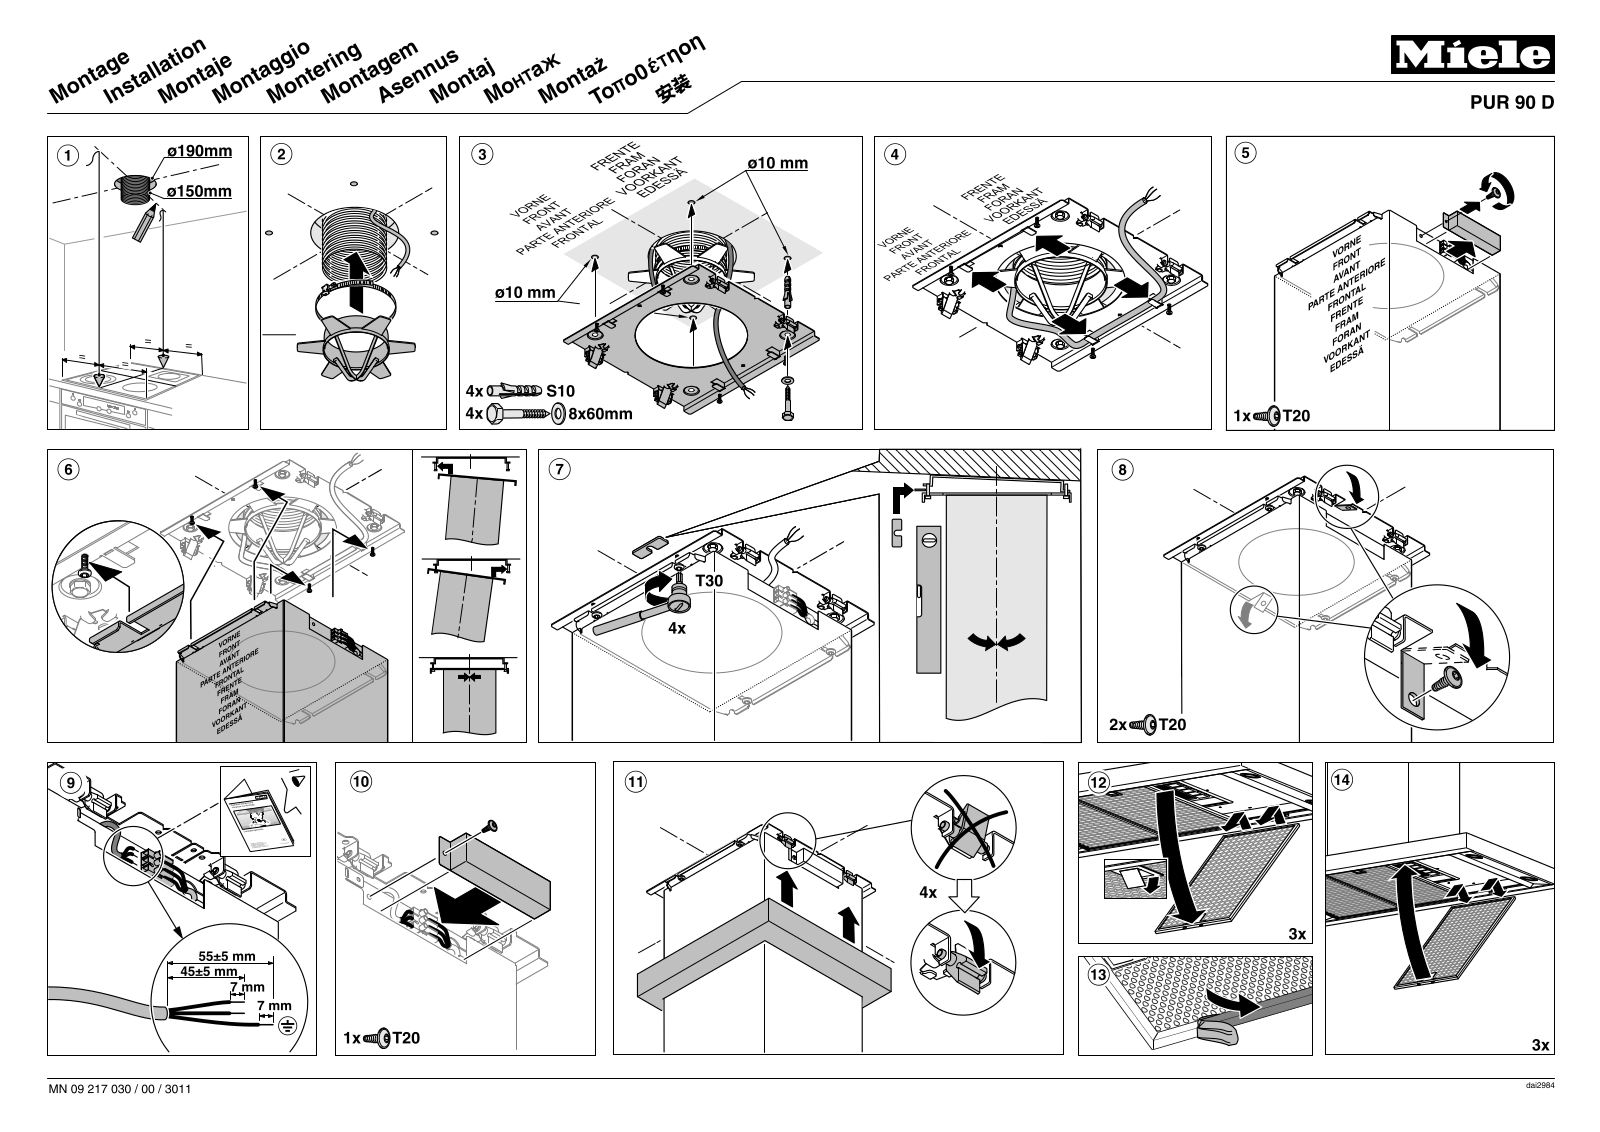 Miele PUR 90 D assembly instruction